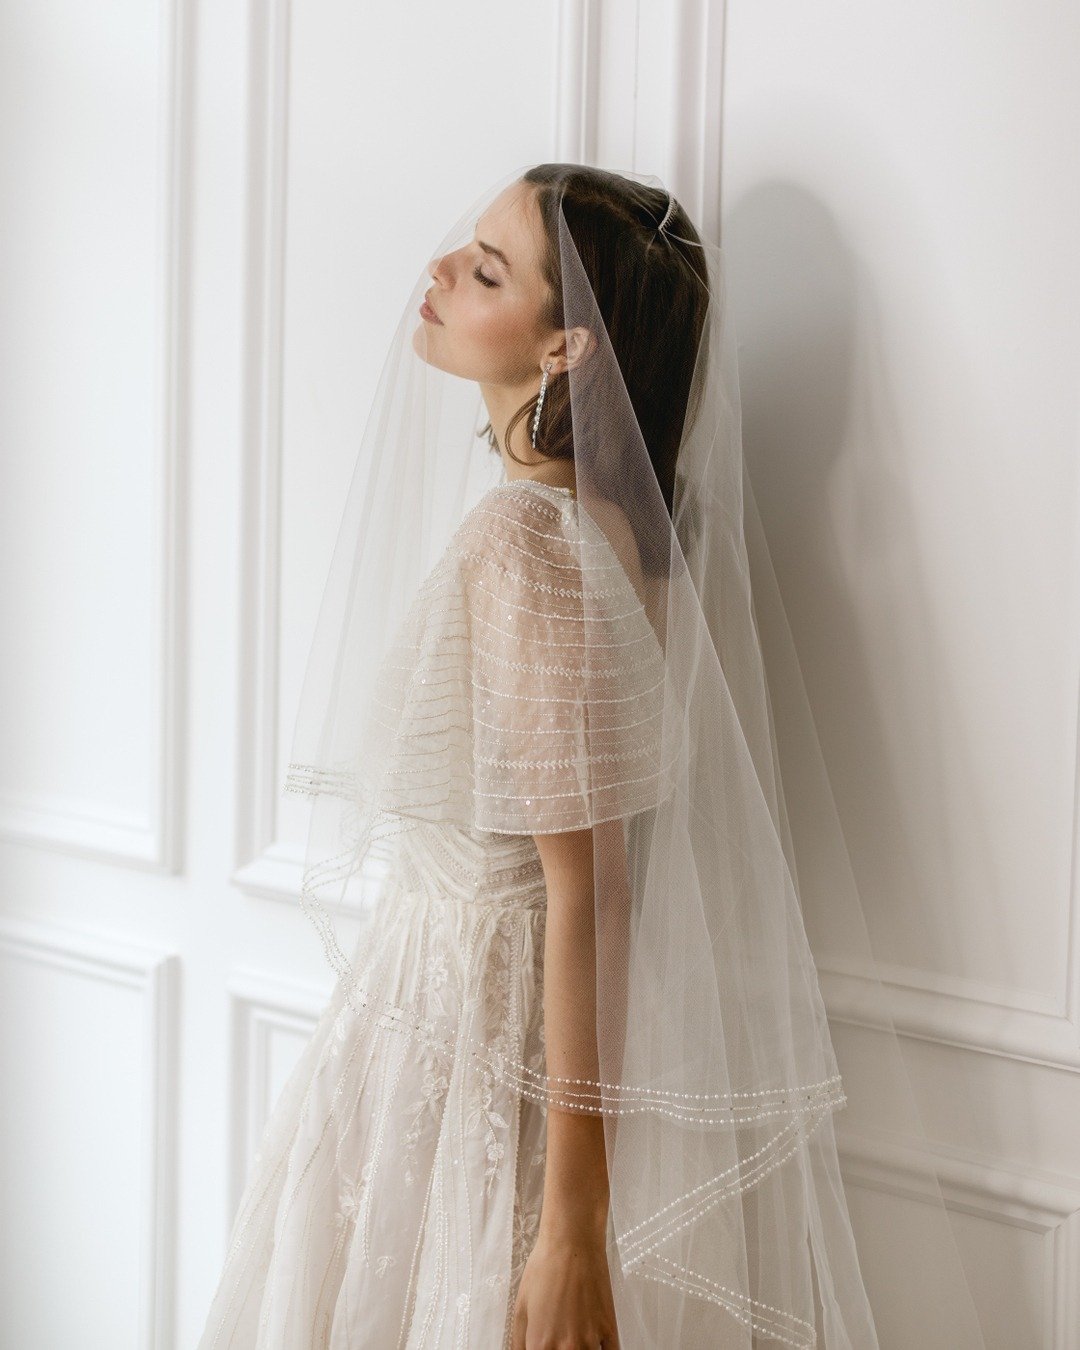 The 11 Best Places To Buy Veils and Accessories